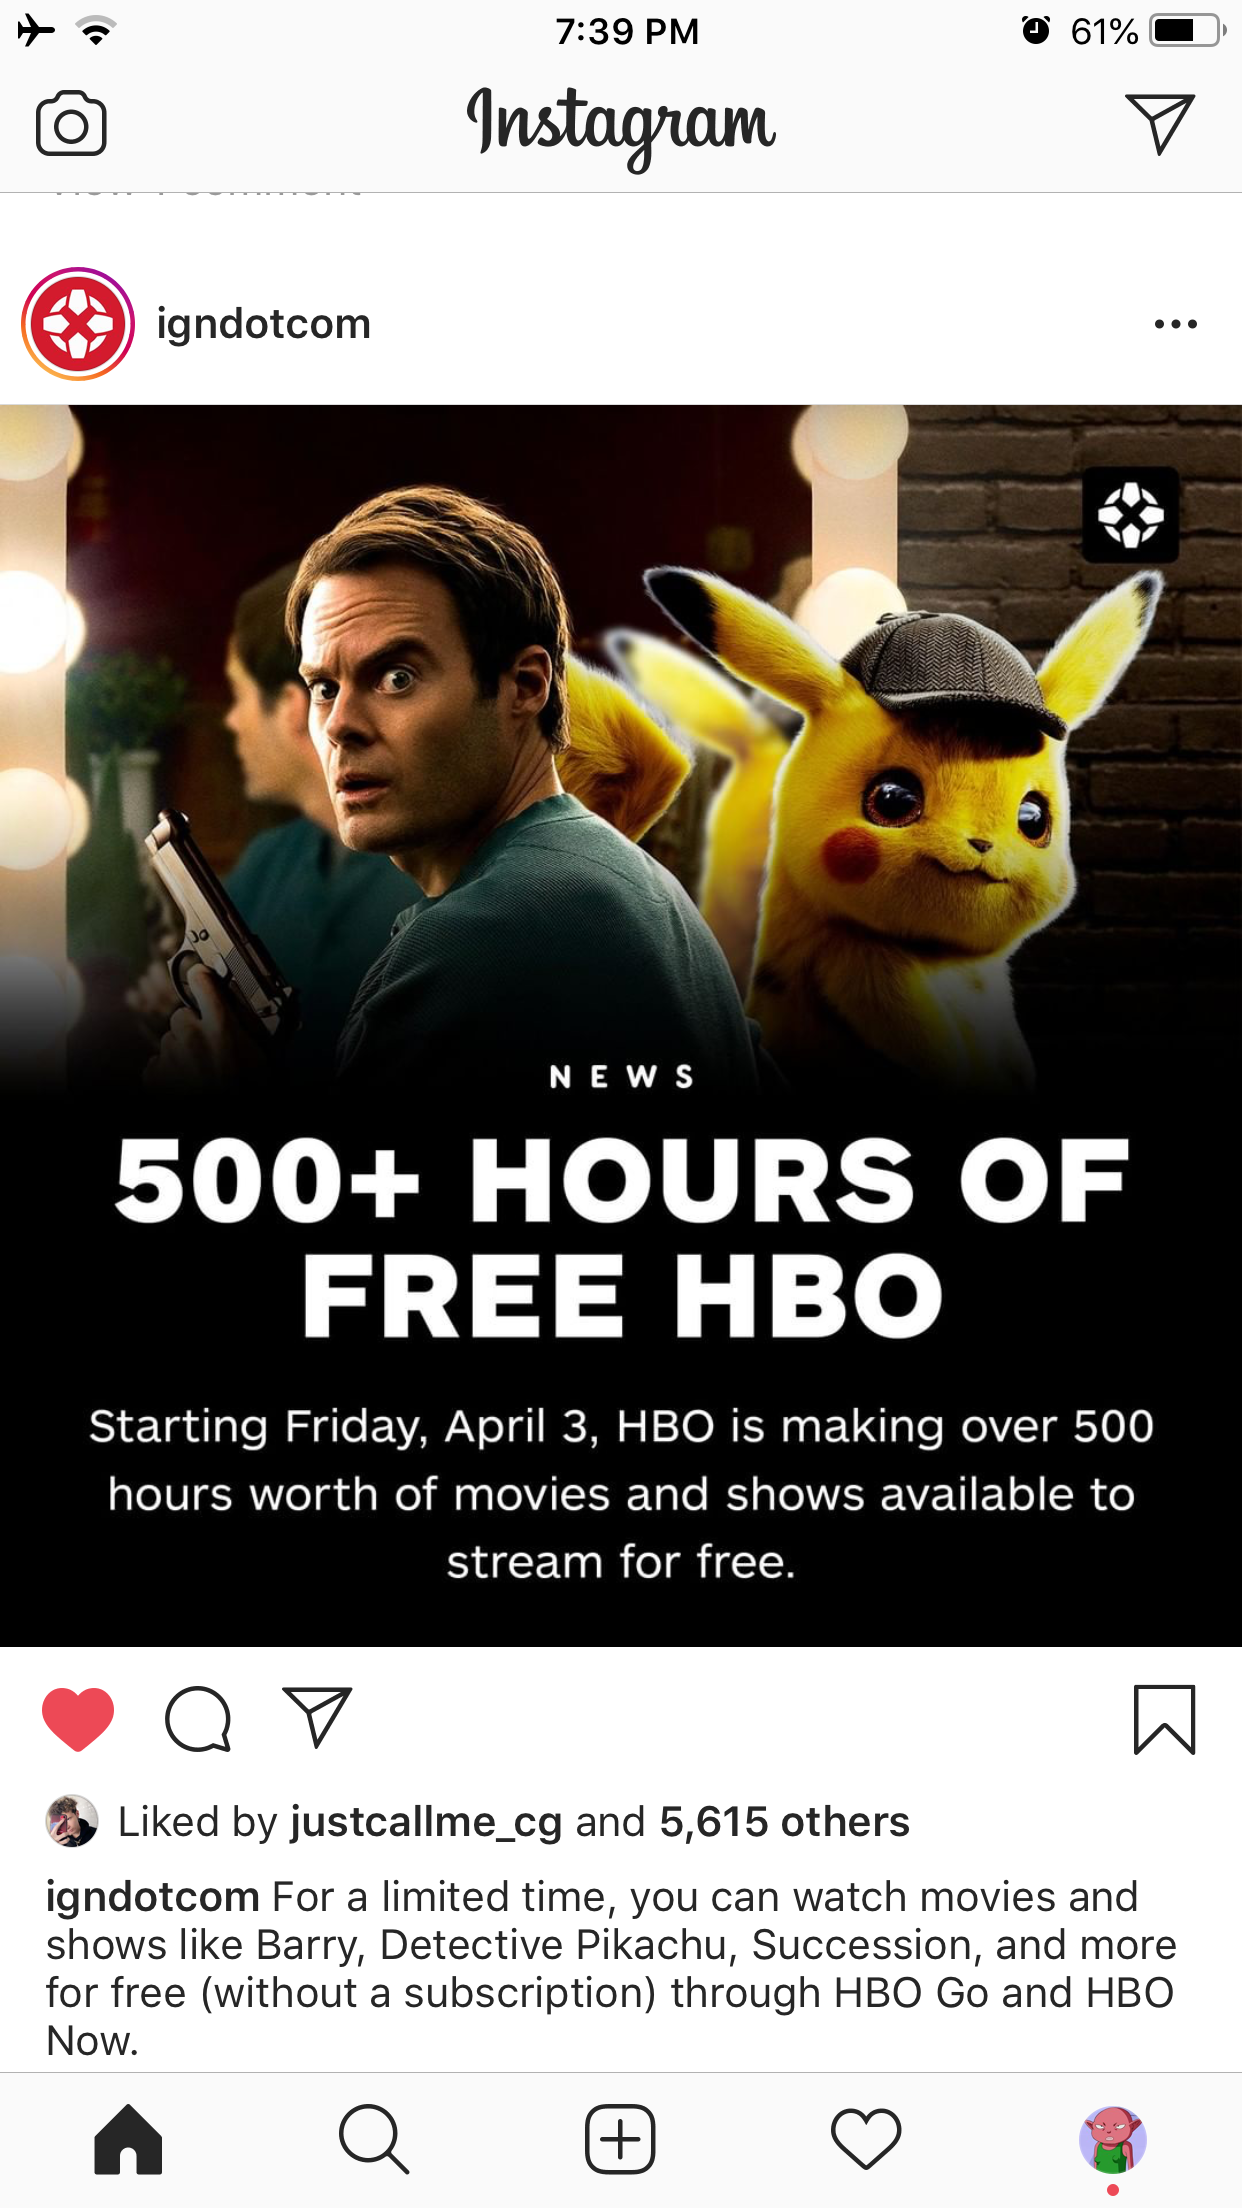 film - 61% Instagram igndotcom 500 Hours Of Free Hbo Starting Friday, April 3, Hbo is making over 500 hours worth of movies and shows available to stream for free. Q d by justcallme_cg and 5,615 others igndotcom For a limited time, you can watch movies an